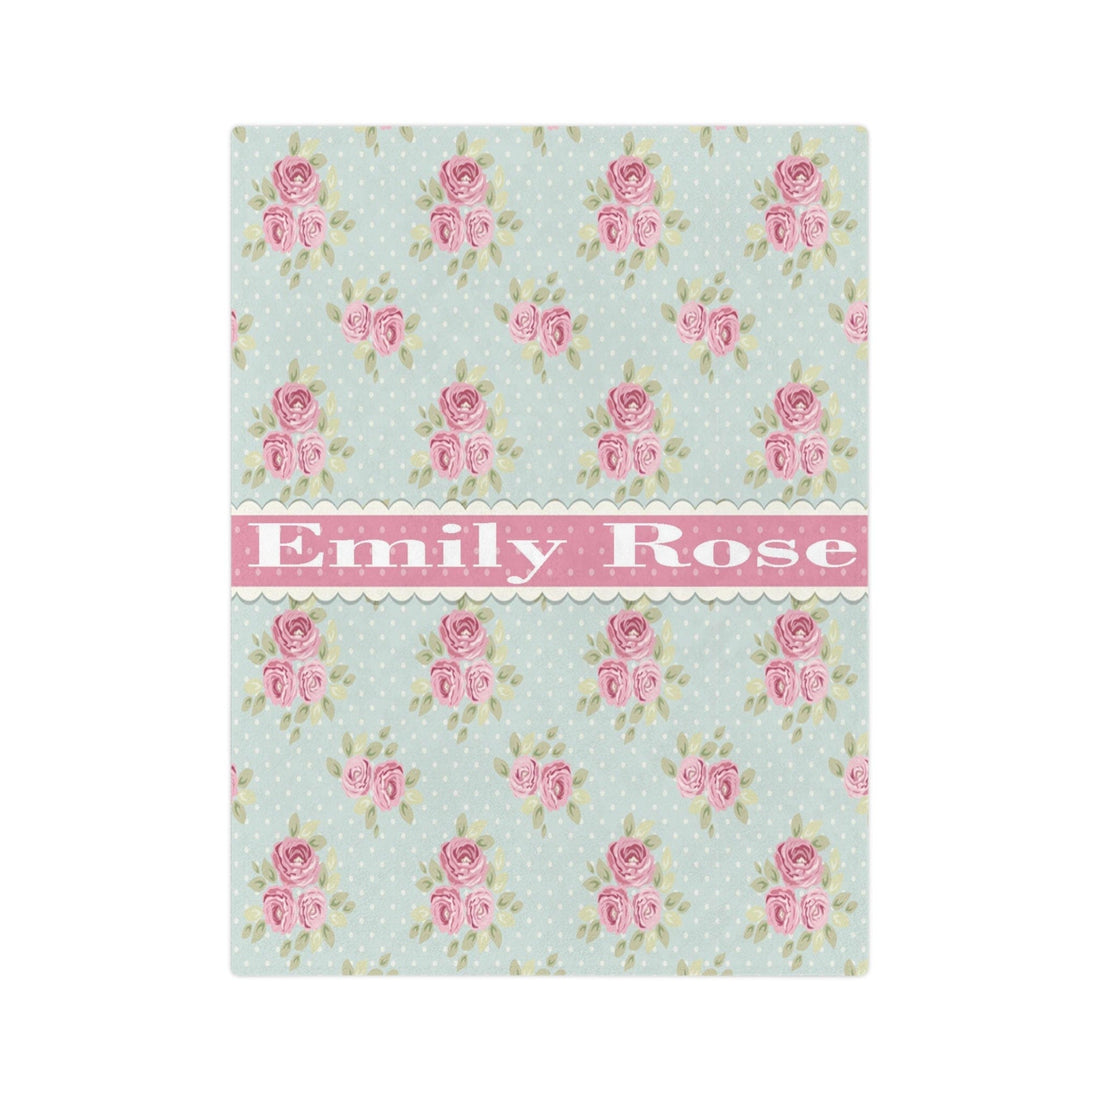 Kate McEnroe New York Personalized Shabby Chic Floral Name Blanket For Kids and Adults, Customizable Velveteen Minky Throw Blankie, Gift for HerBlankets27921052990012072496